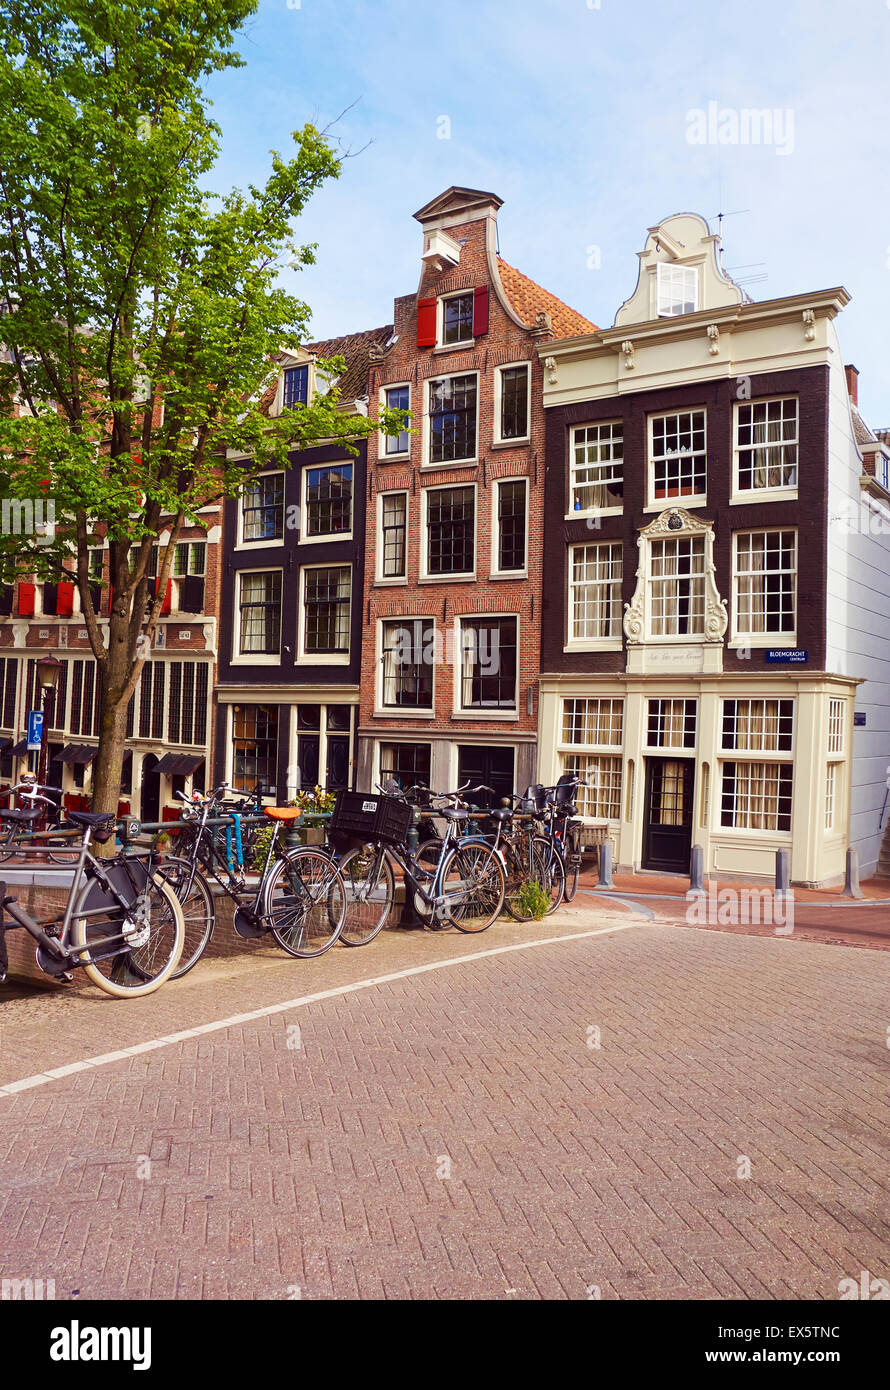 Typical canalside houses and bicycles in the Nine Streets district of Amsterdam, Netherlands, EU. Stock Photo